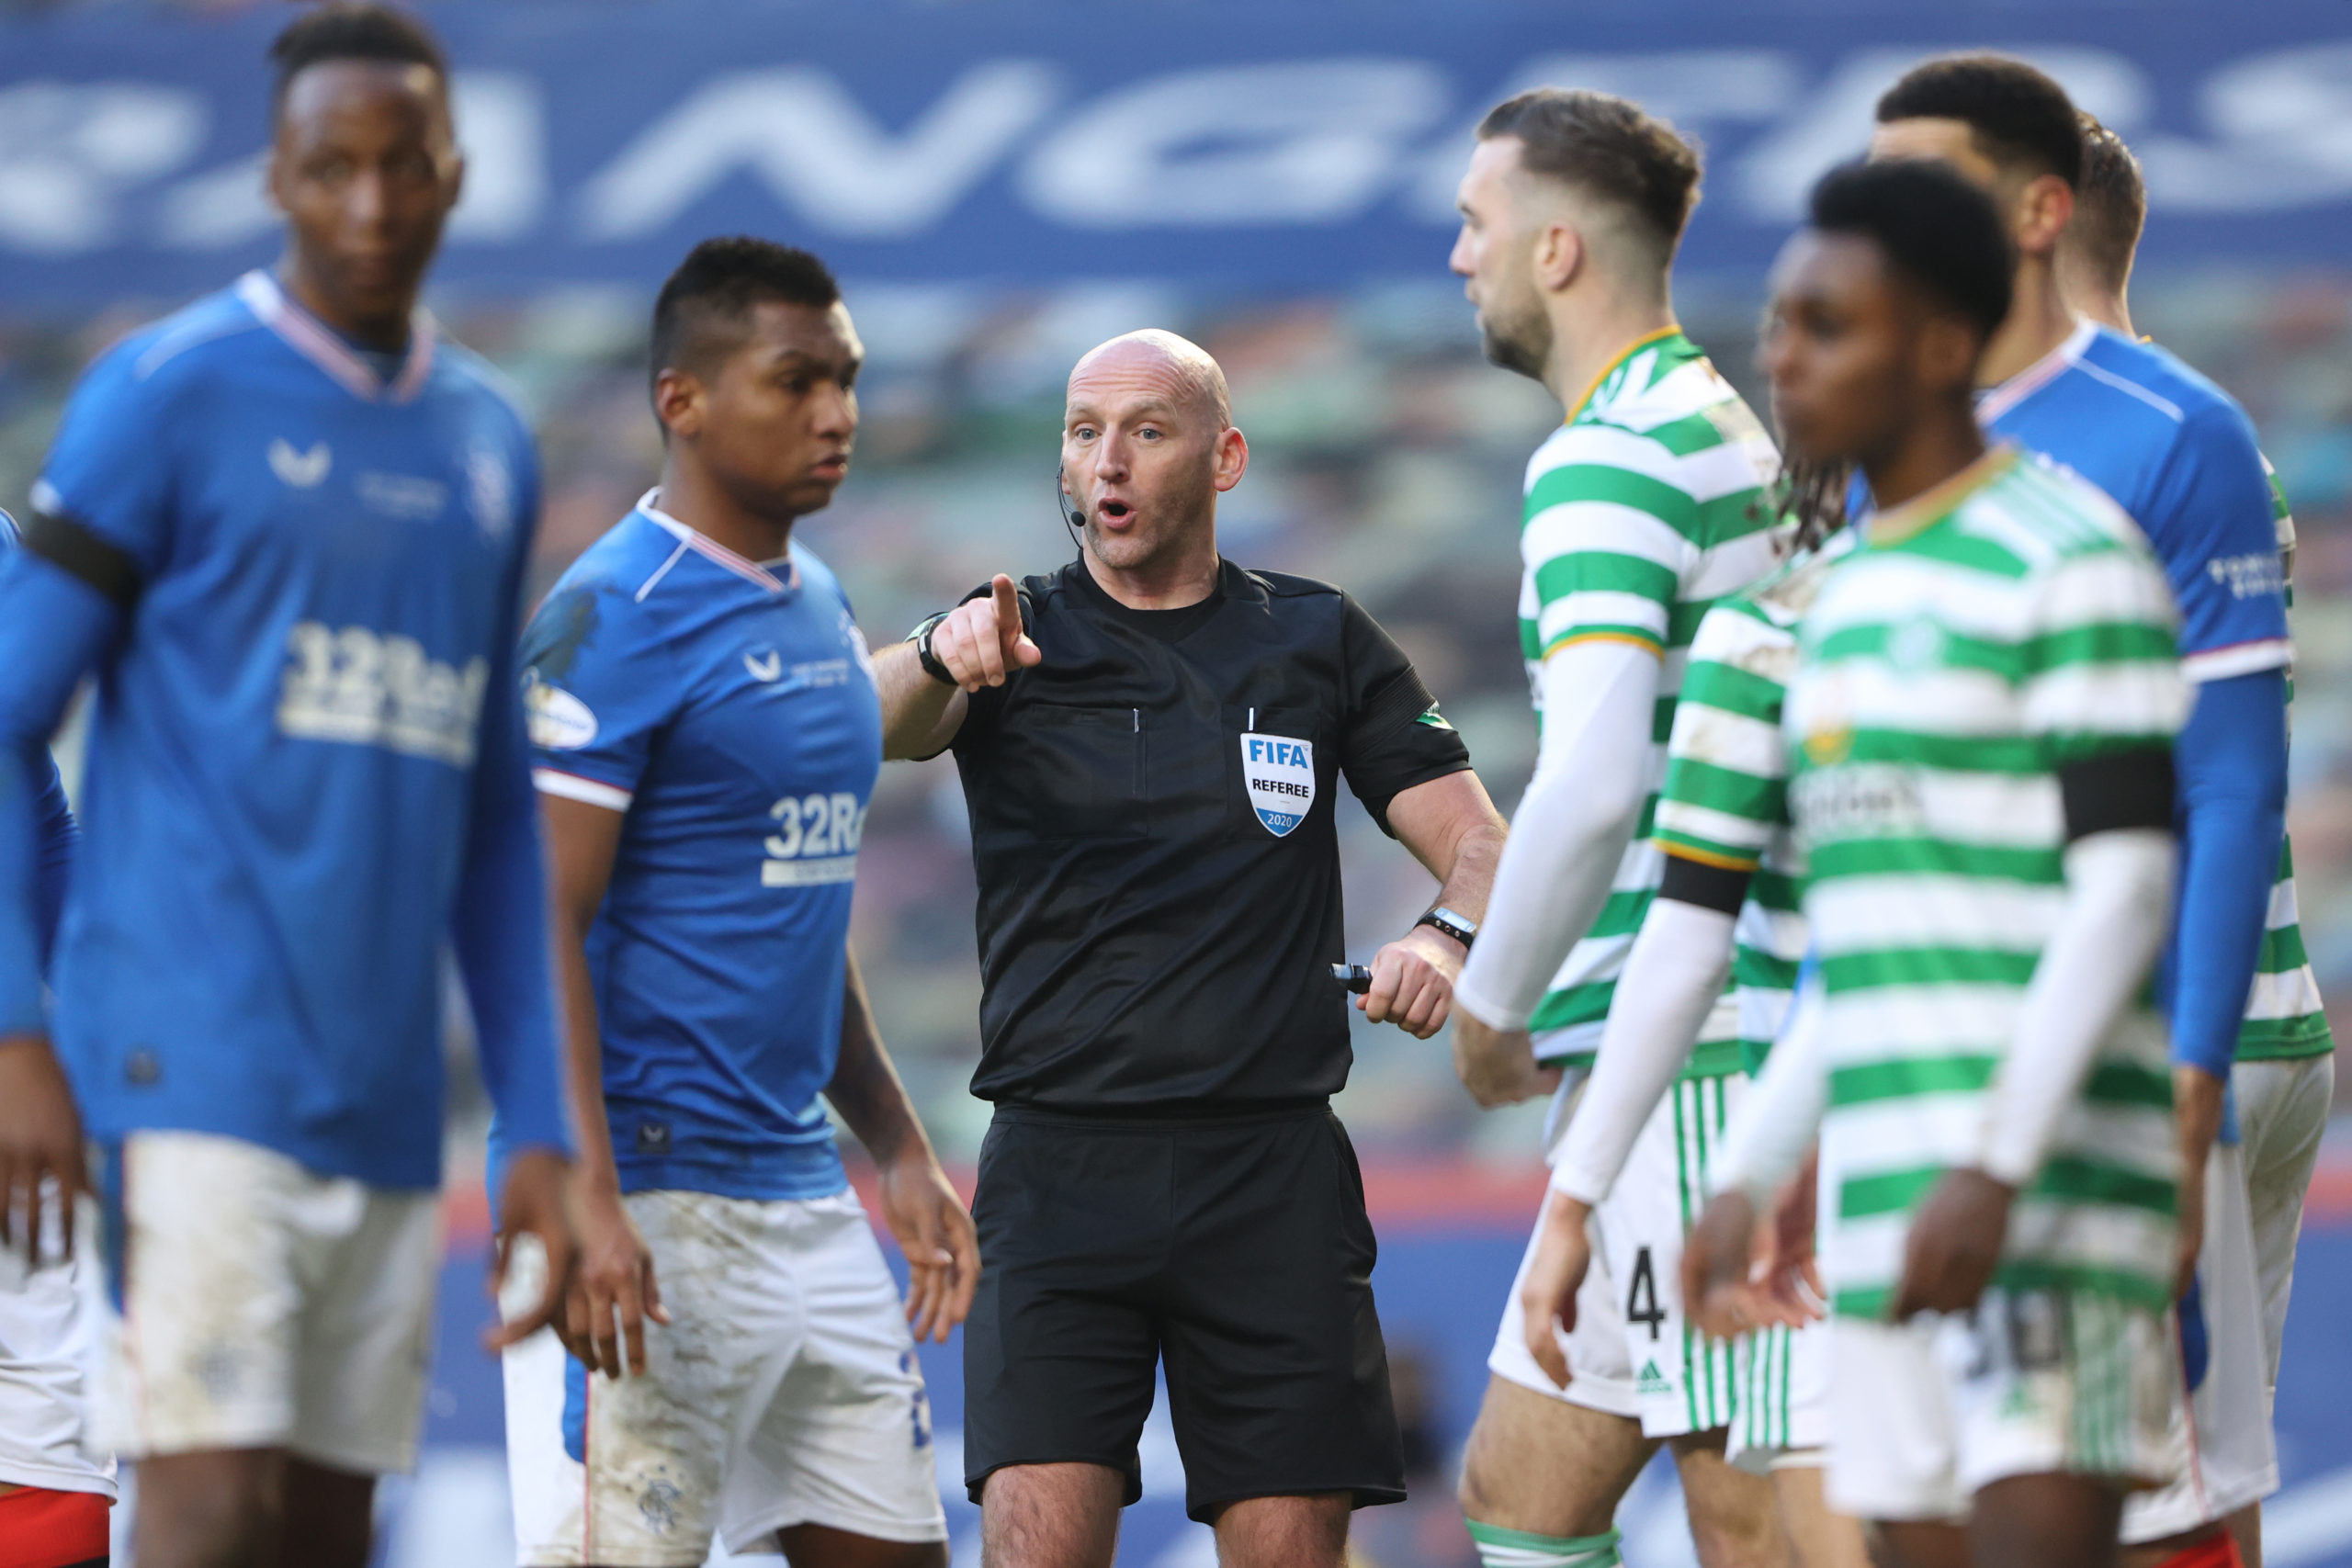 3 referee appointments confirmed for upcoming Celtic matches as Lennon speaks out against SFA